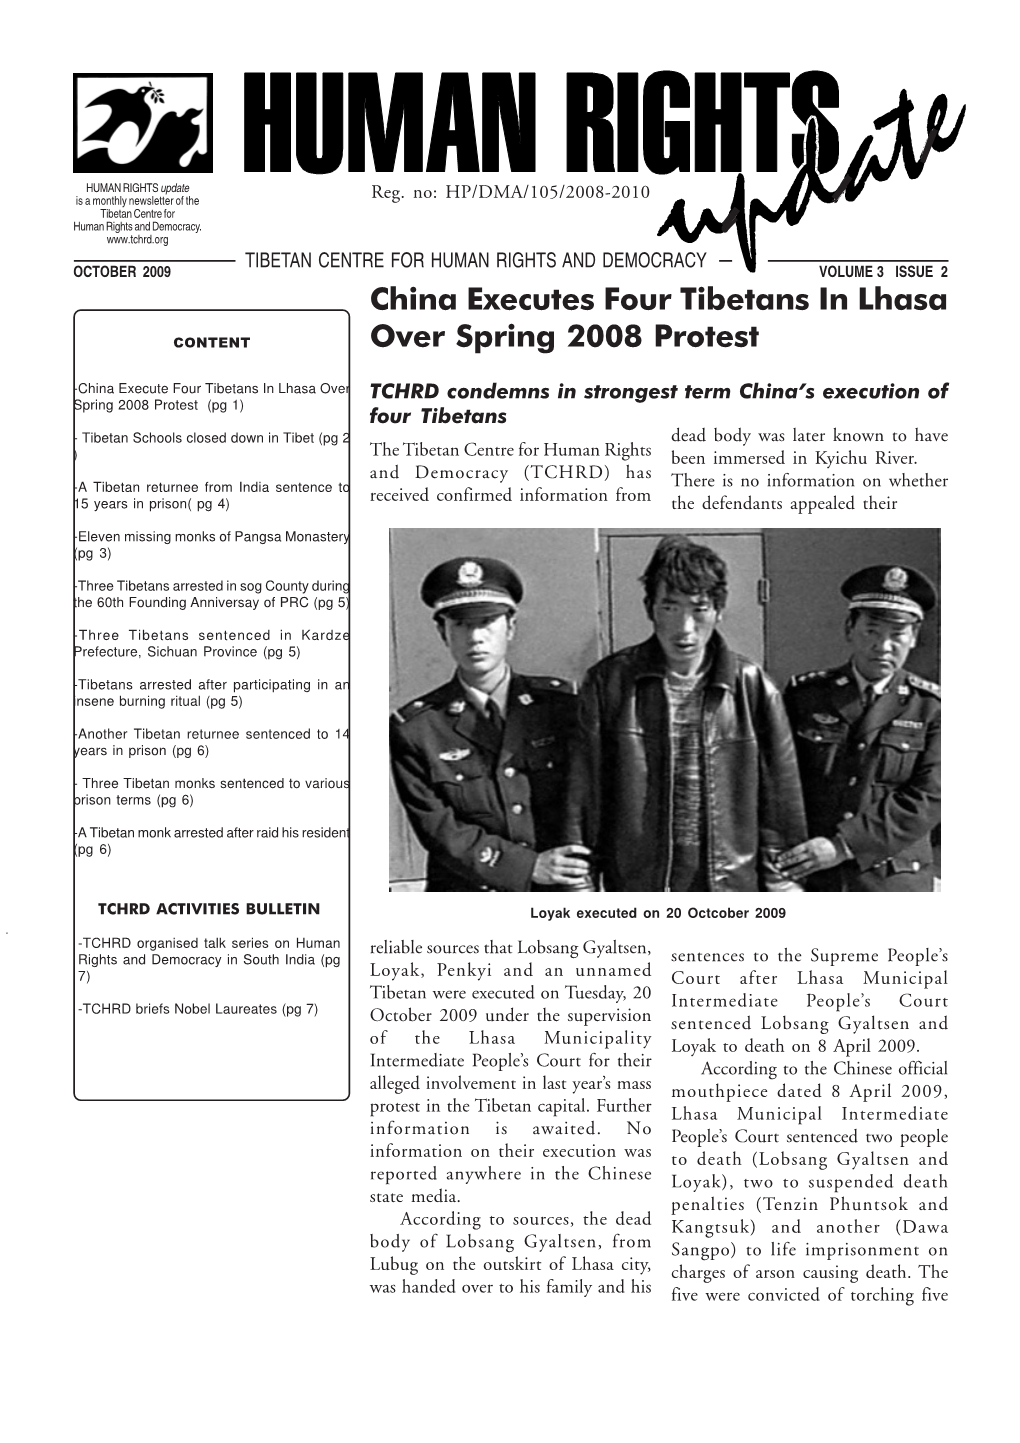 China Executes Four Tibetans in Lhasa Over Spring 2008 Protest